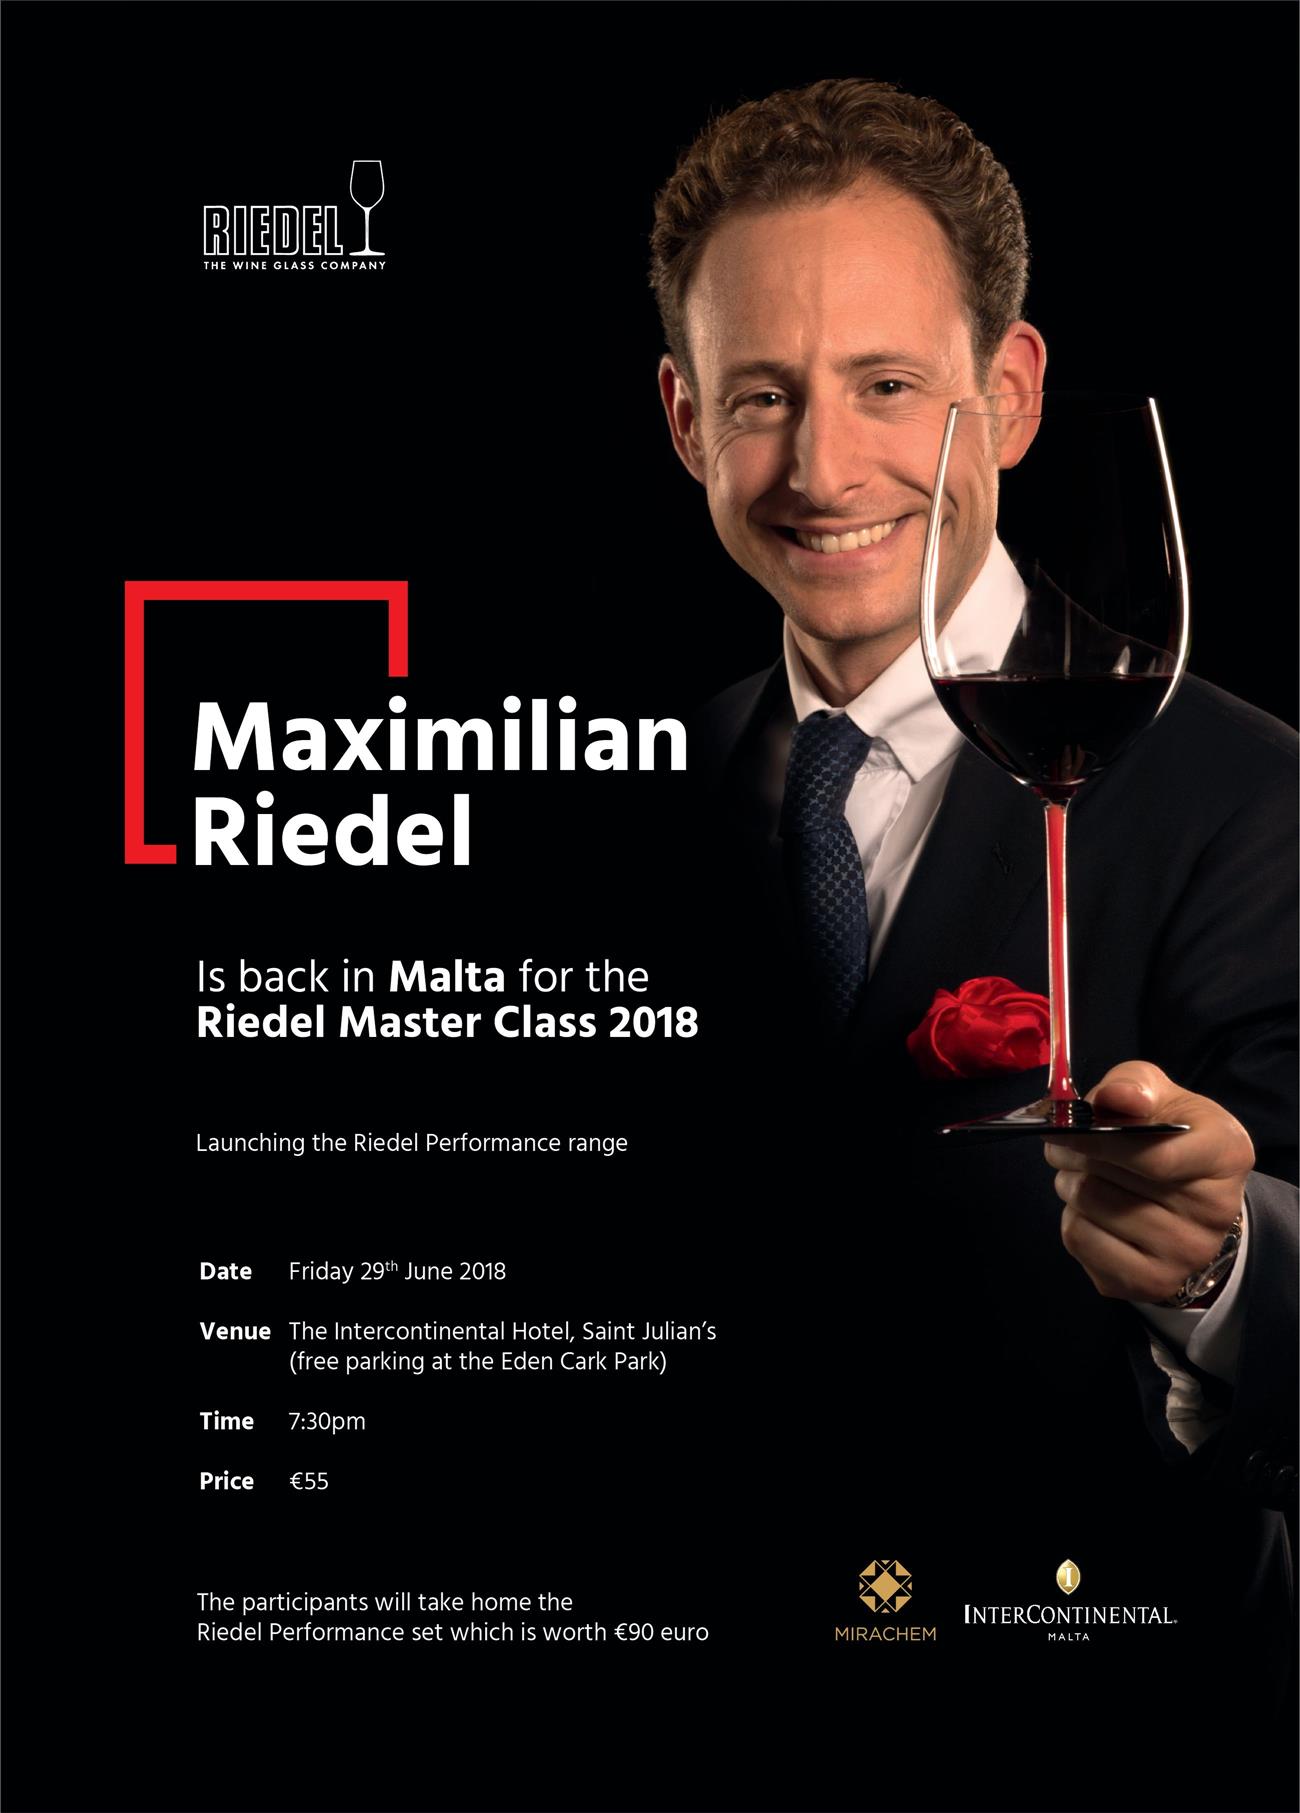 The Riedel Masterclass 2018 – Featuring Maximilian Riedel poster